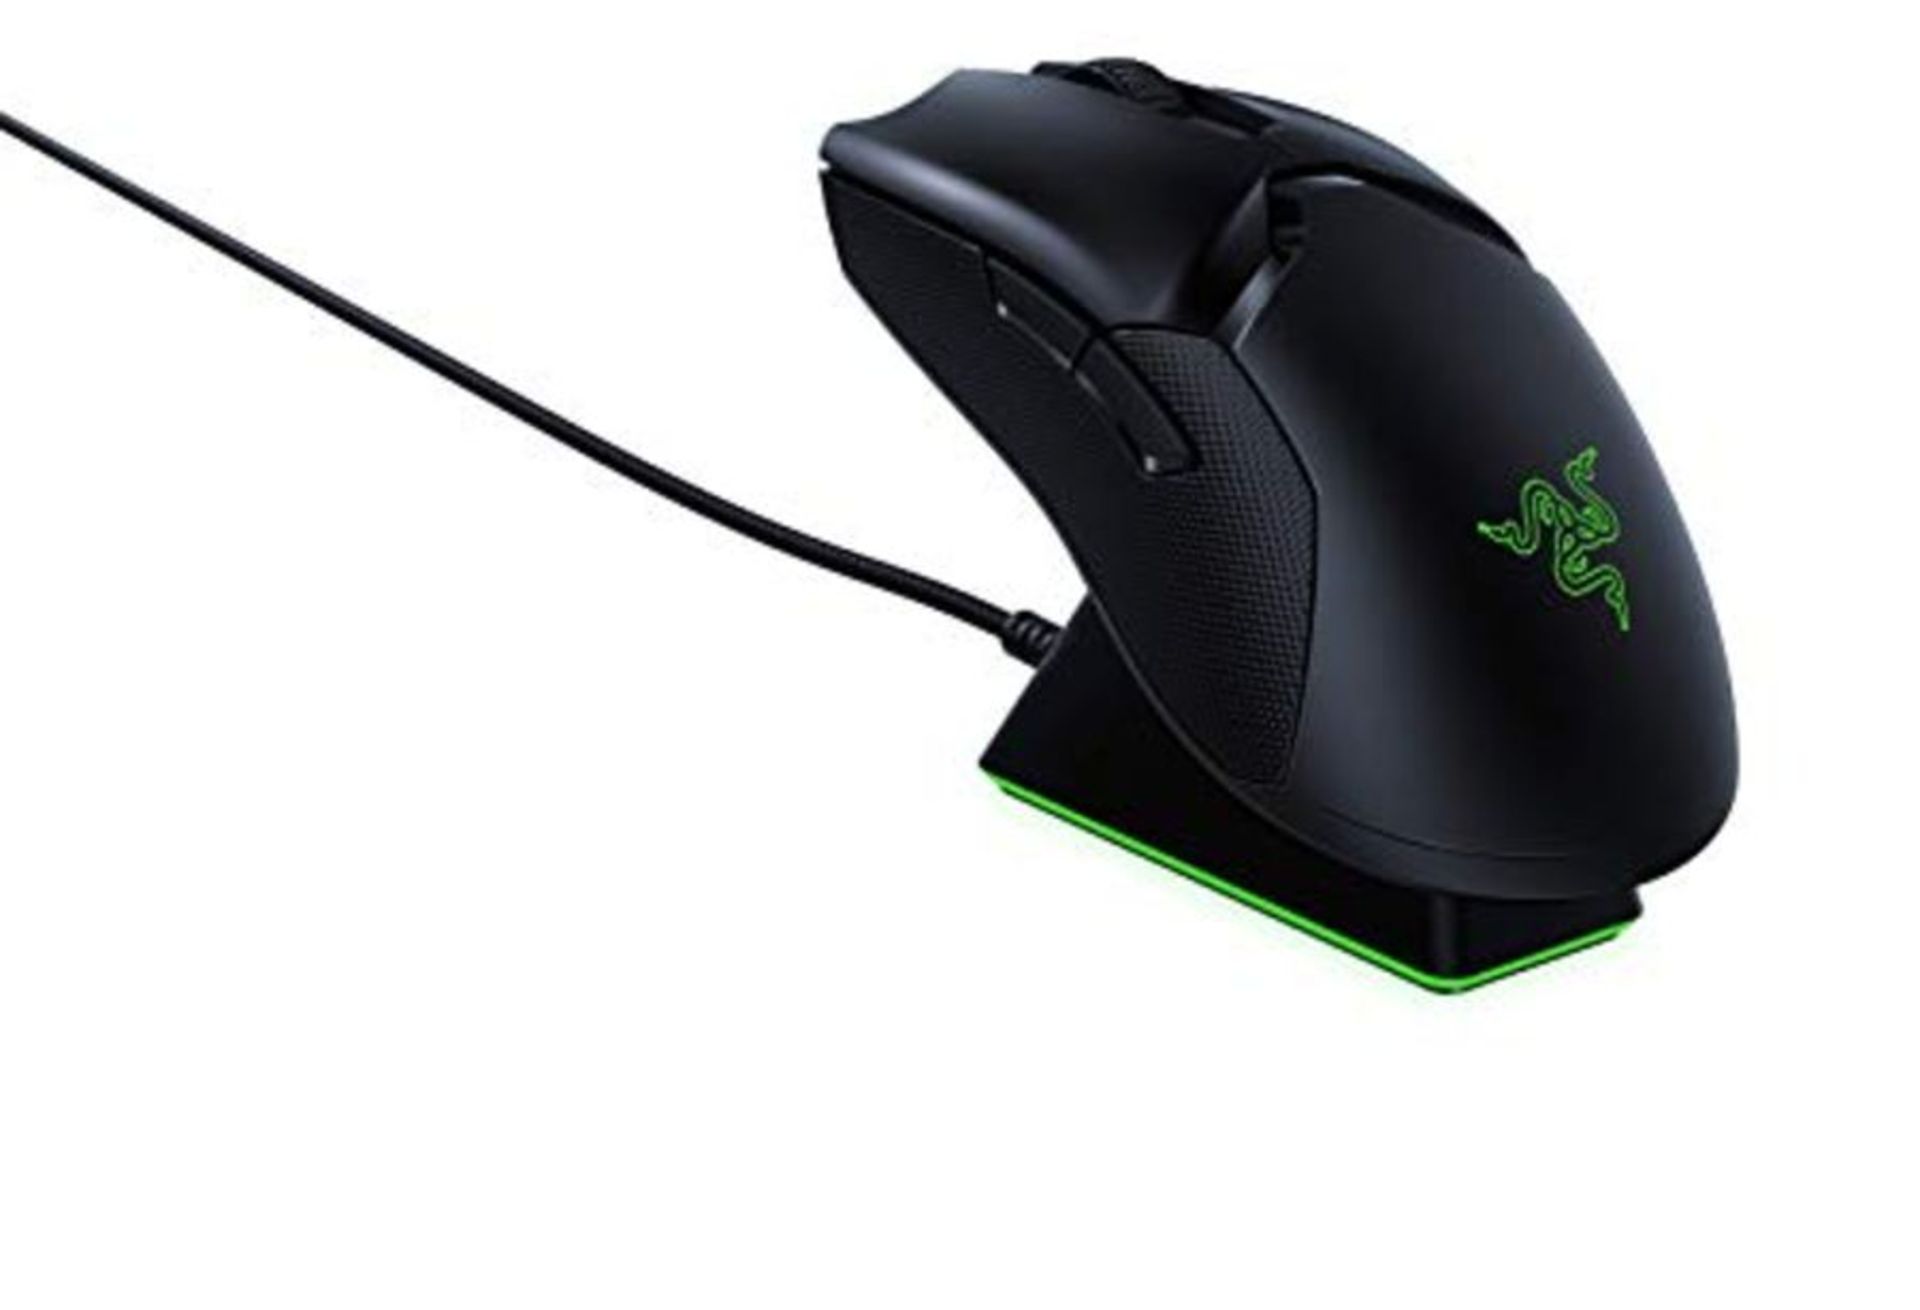 RRP £109.00 Razer Viper Ultimate Ambidextrous Gaming Mouse with Charging Dock - Black